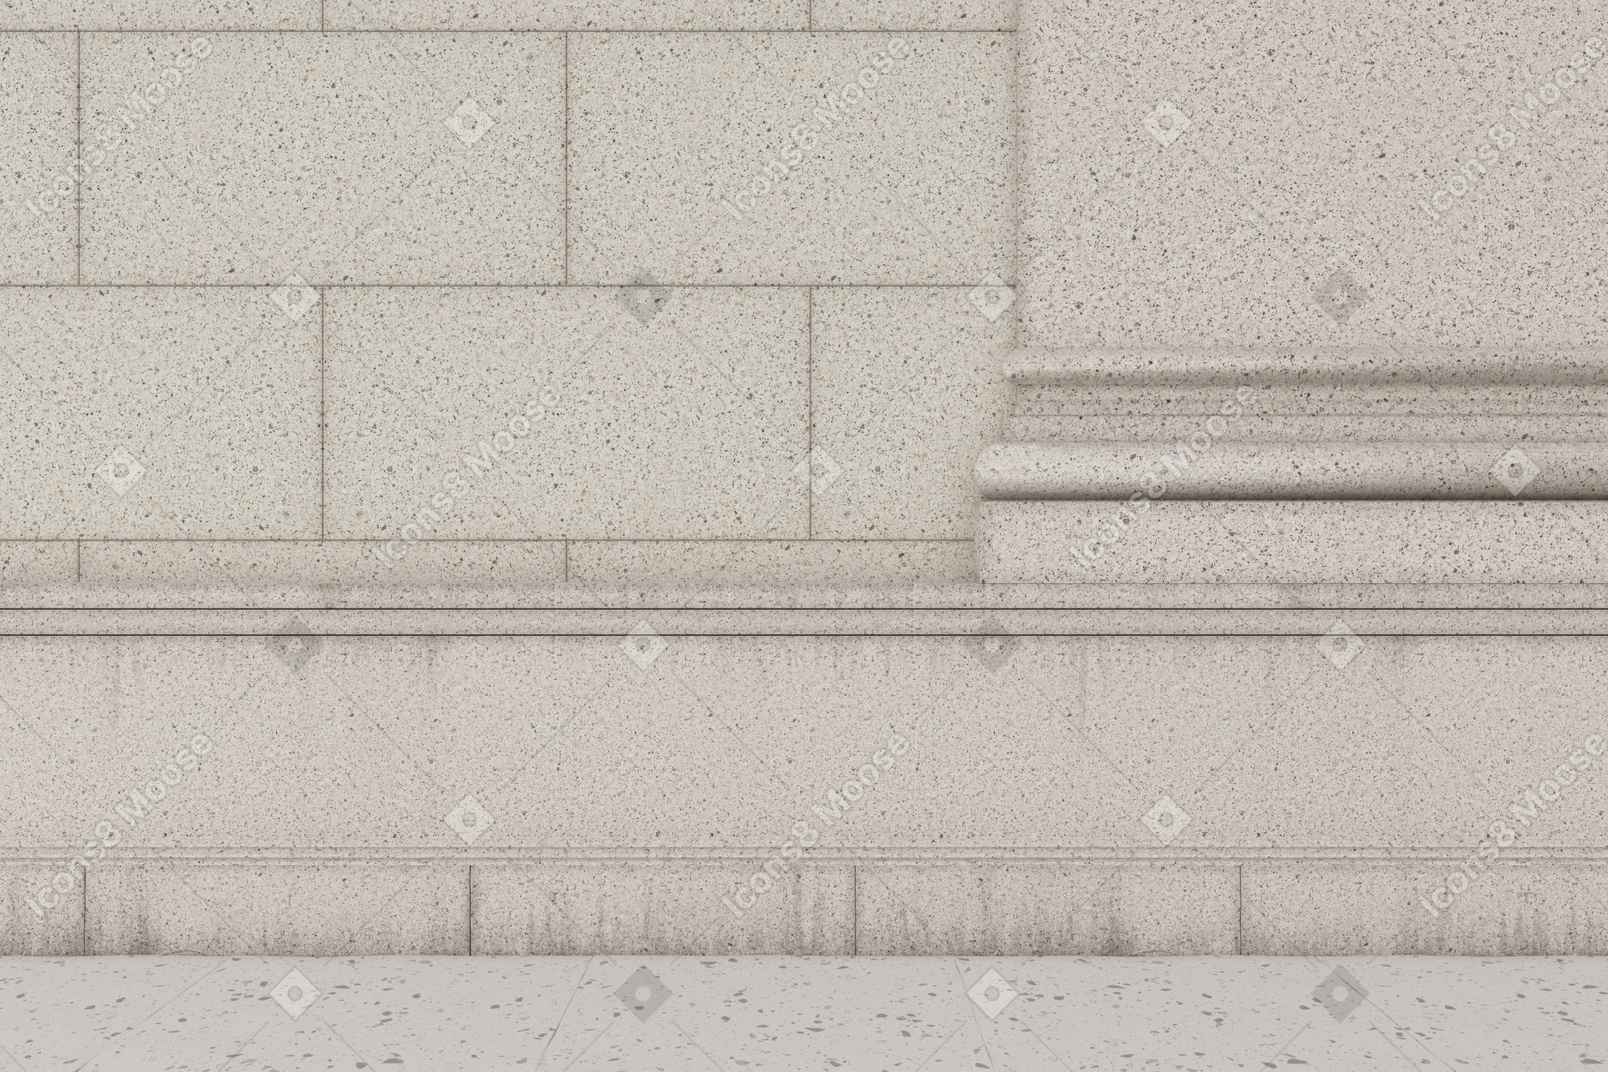 Just a simple grey wall of stone blocks